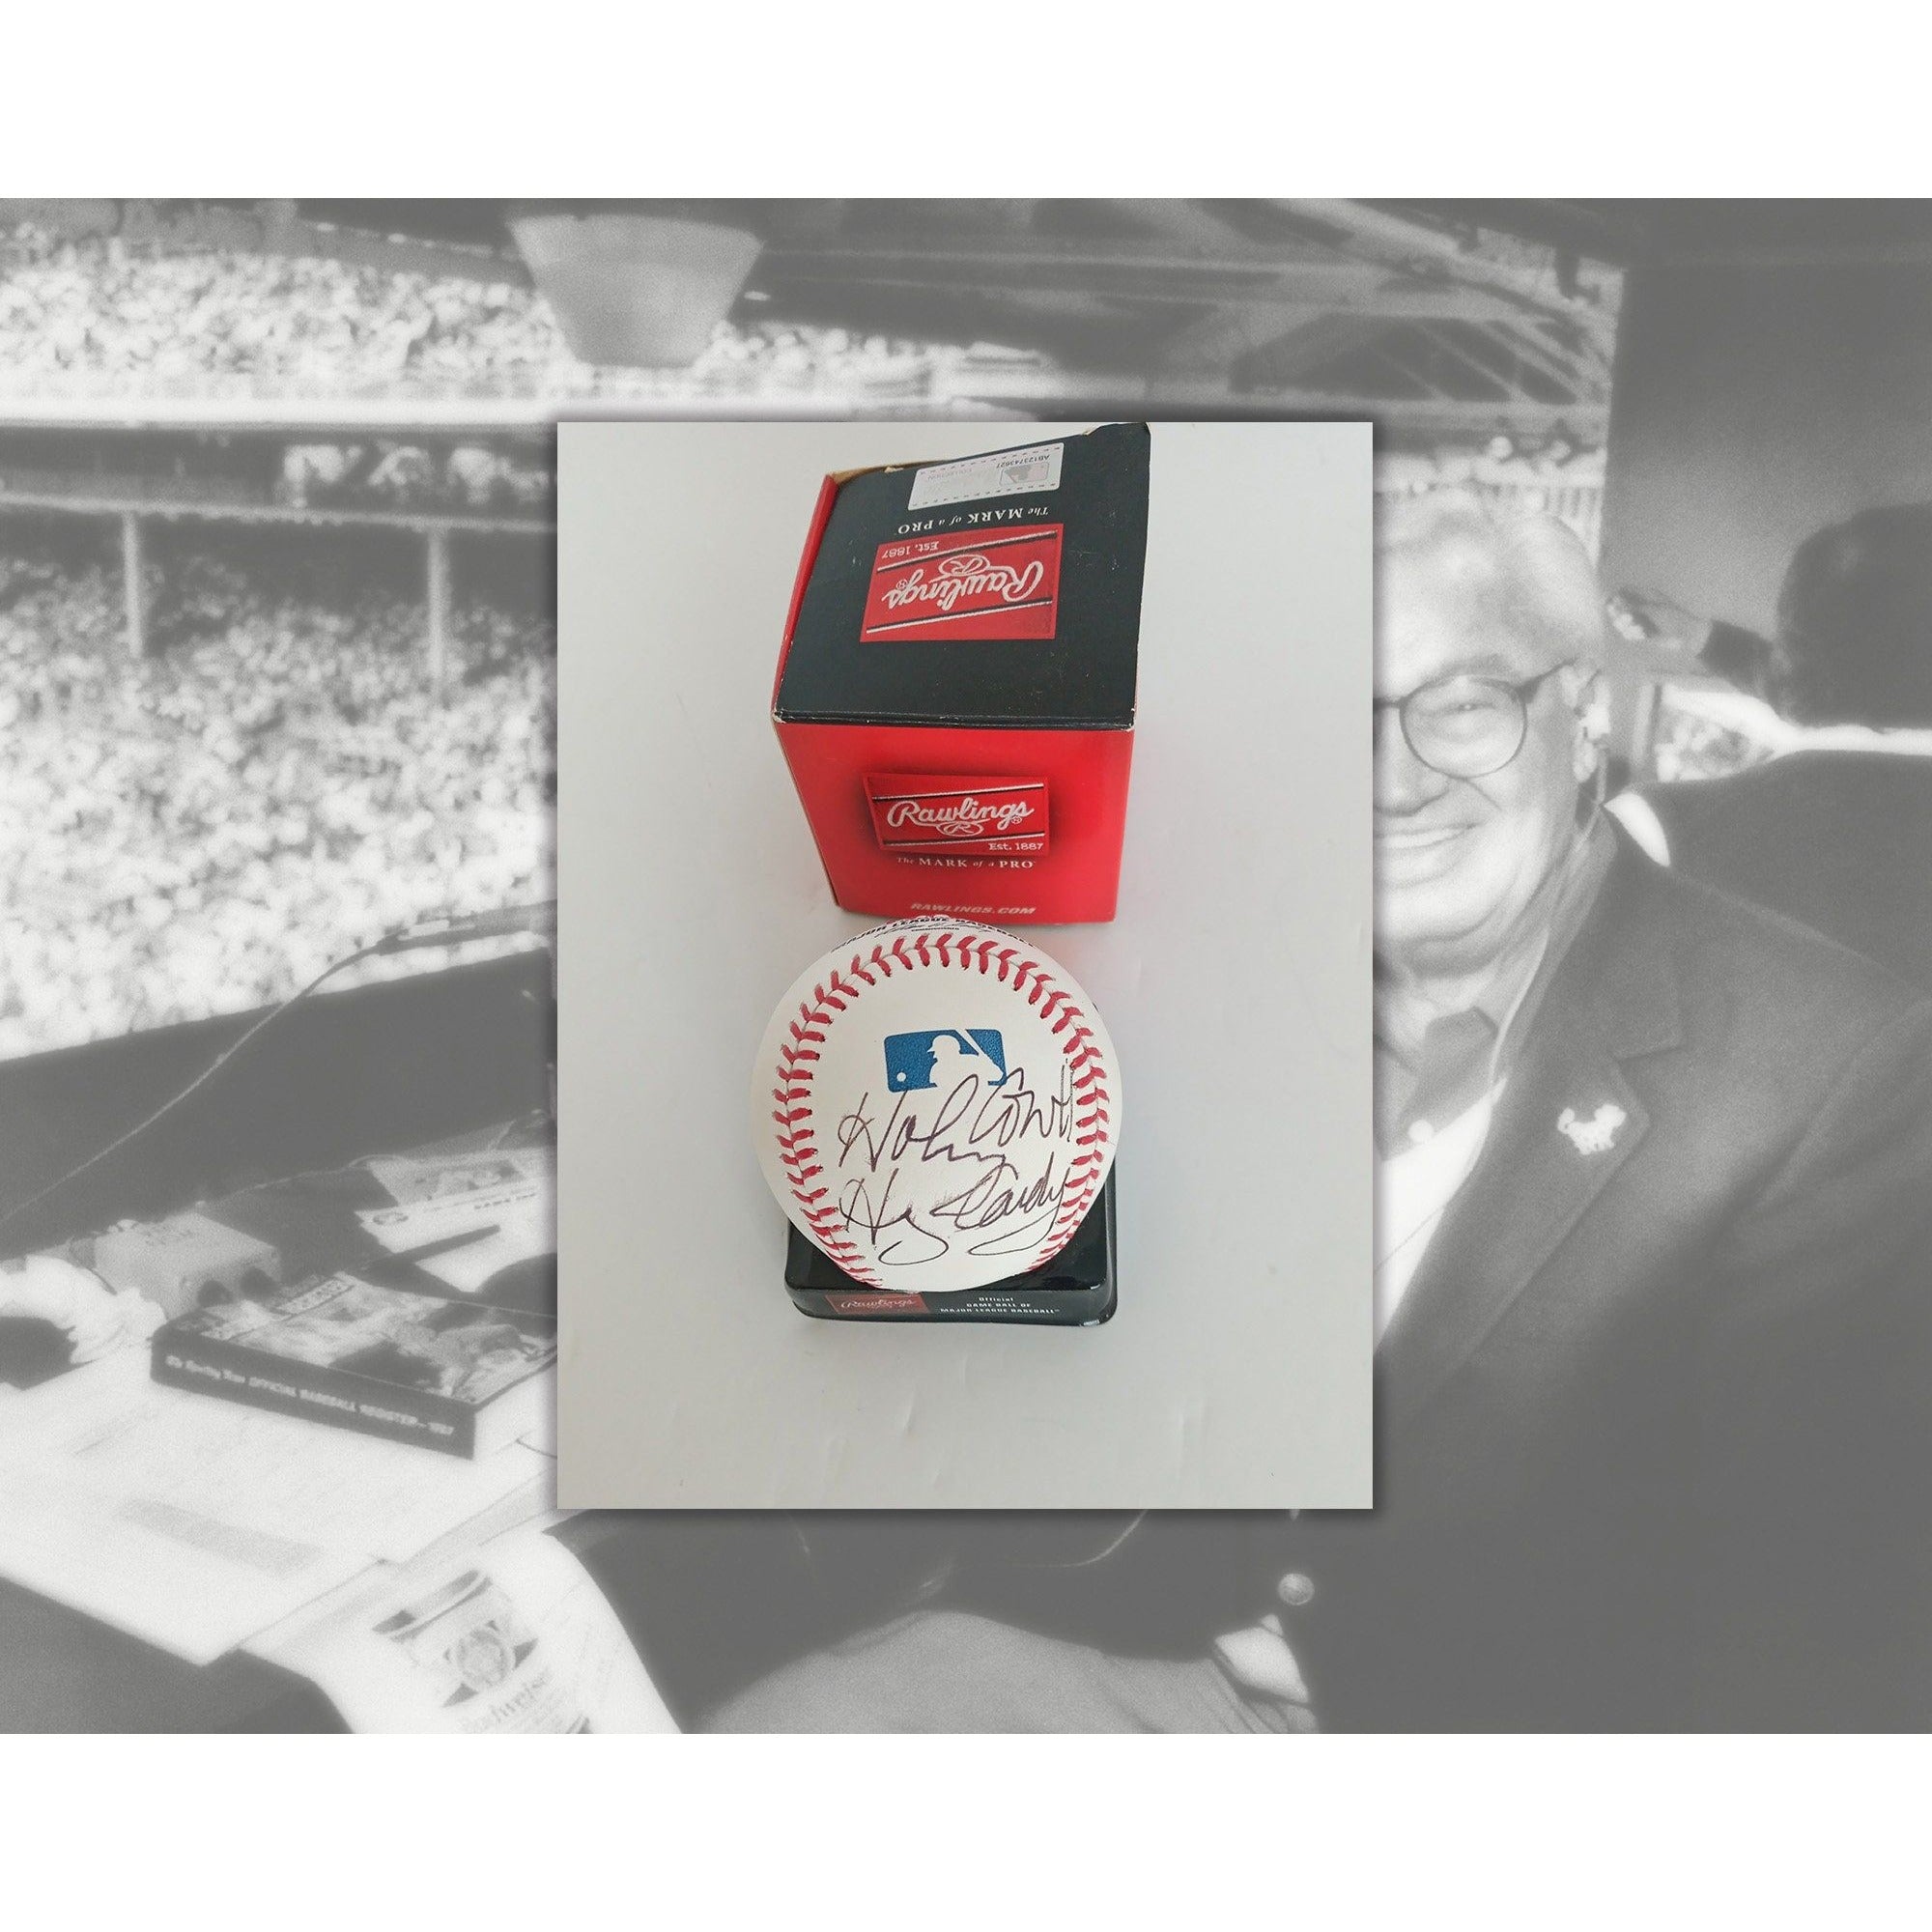 Harry Caray 'Holy cow' Chicago Cubs MLB baseball